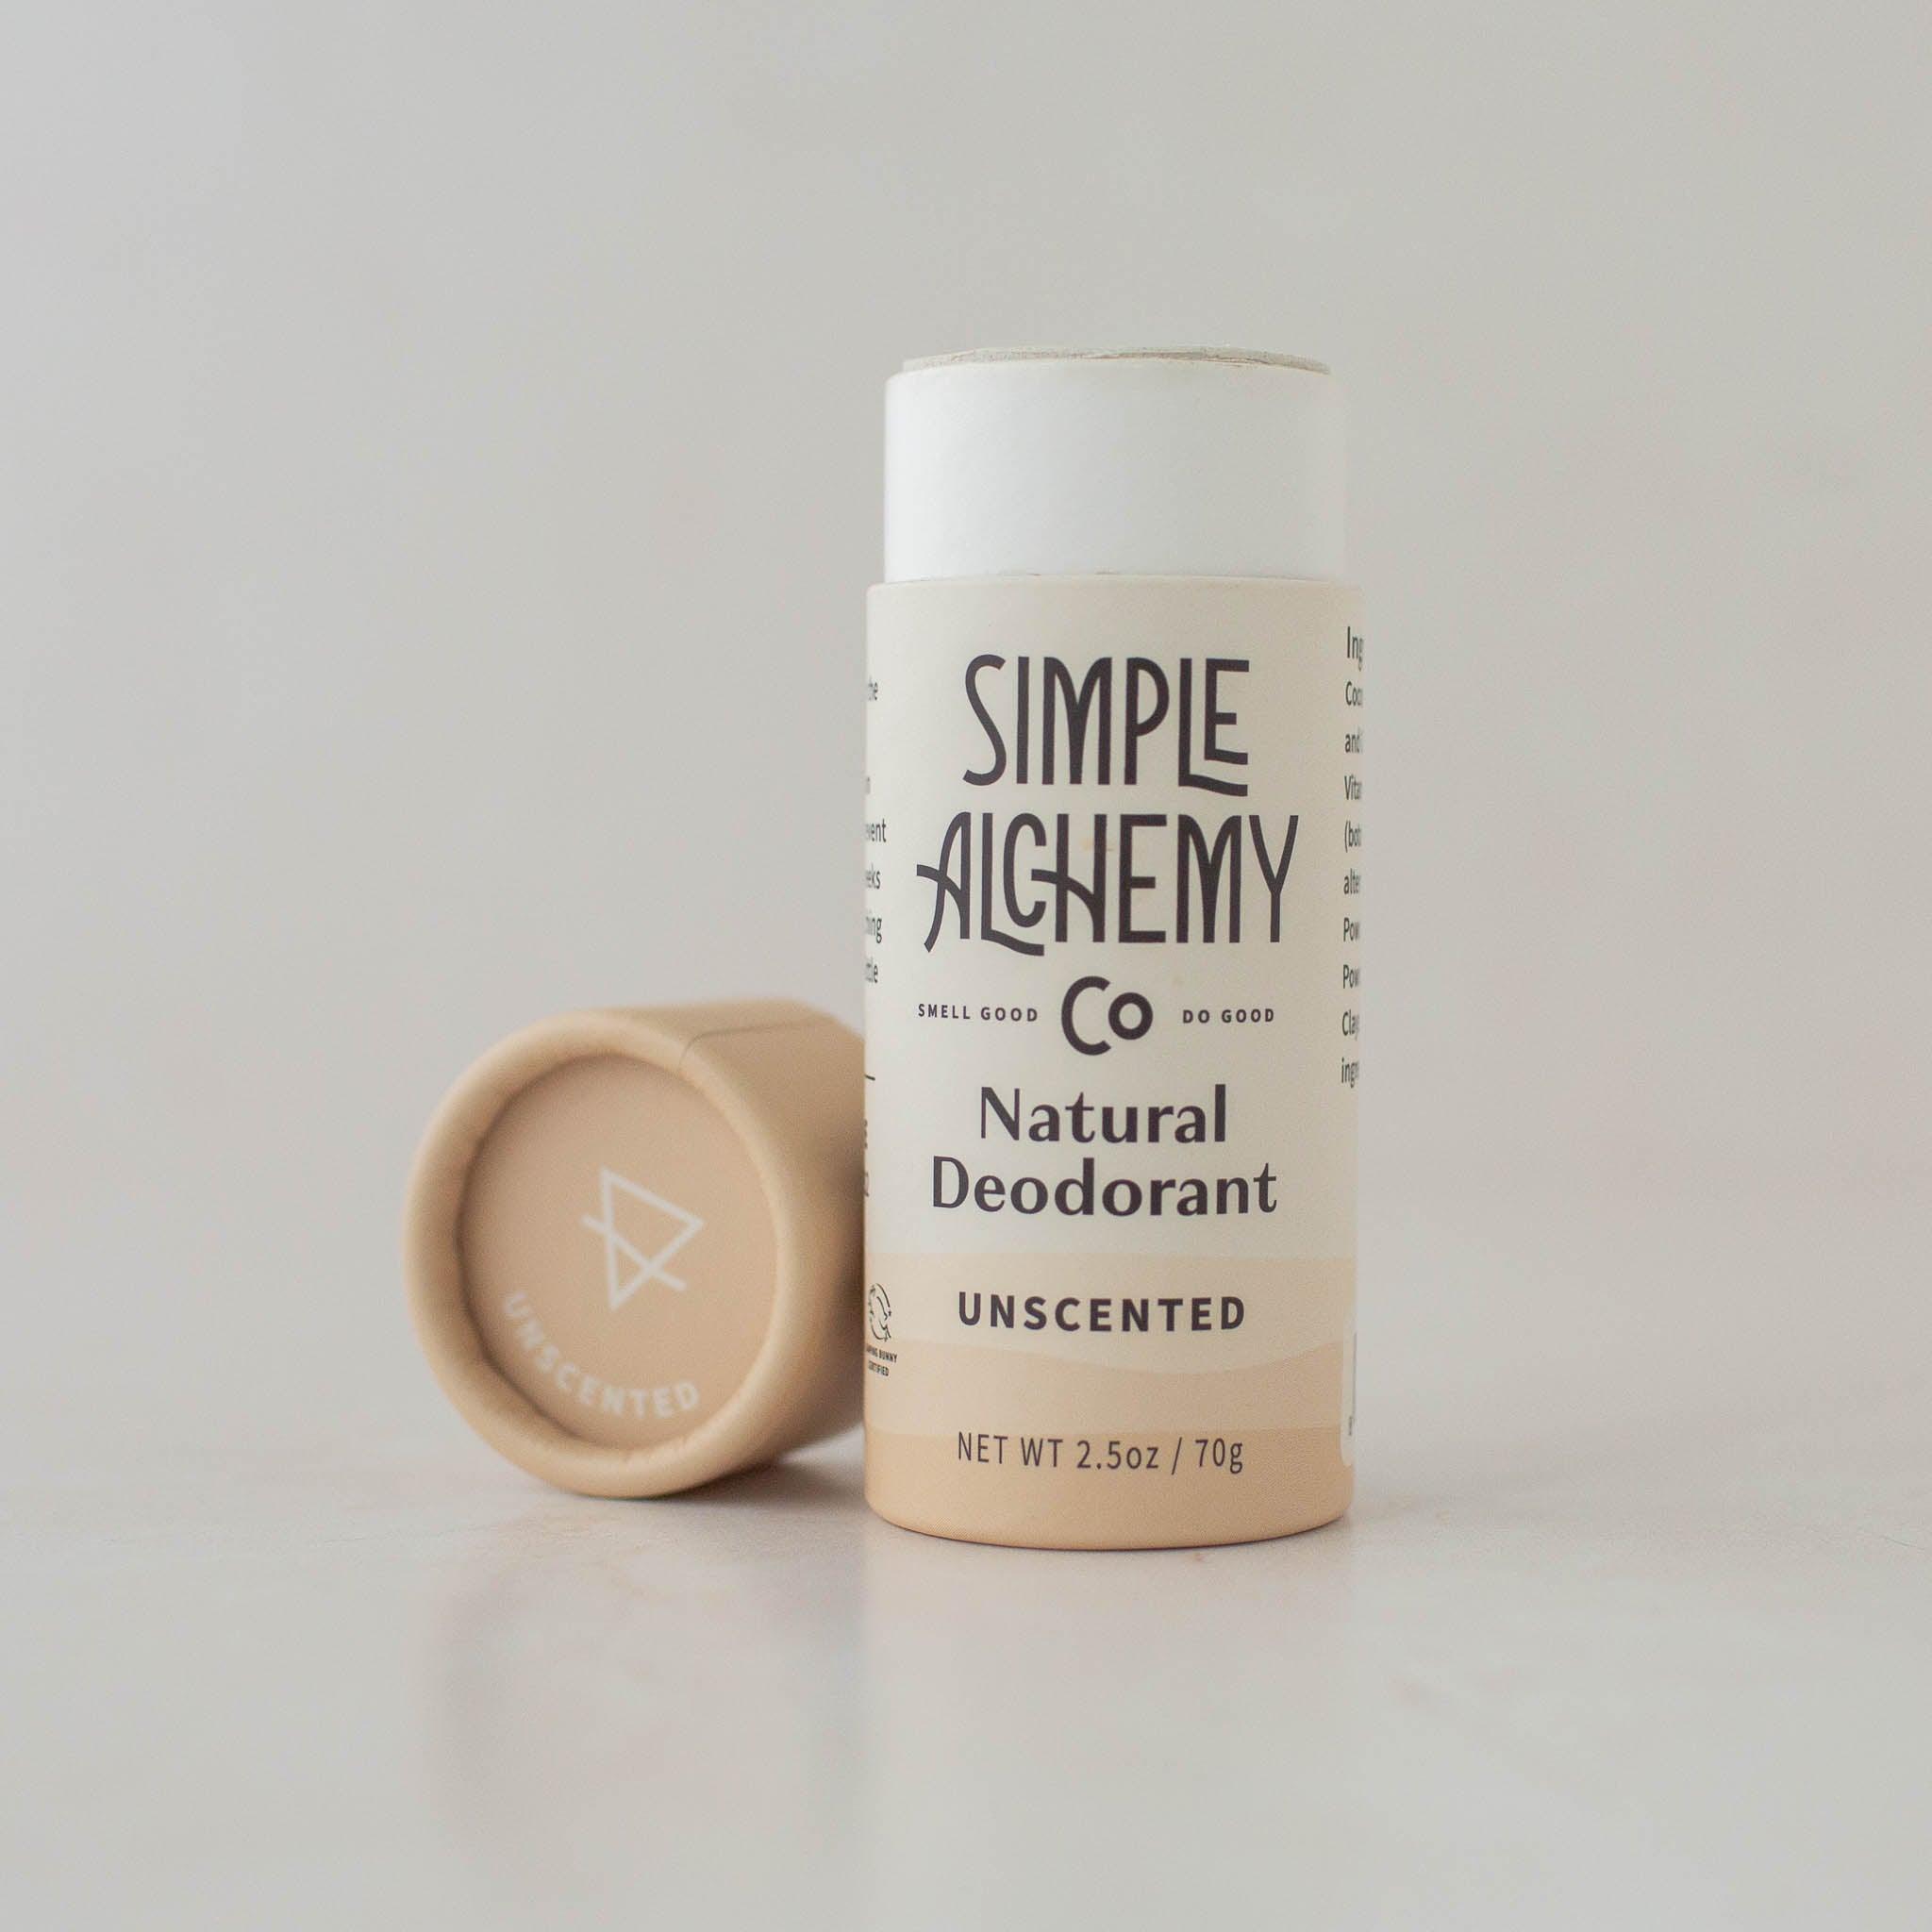 Cream colored compostable paper push-up tube of Unscented Natural Deodorant with cap off.